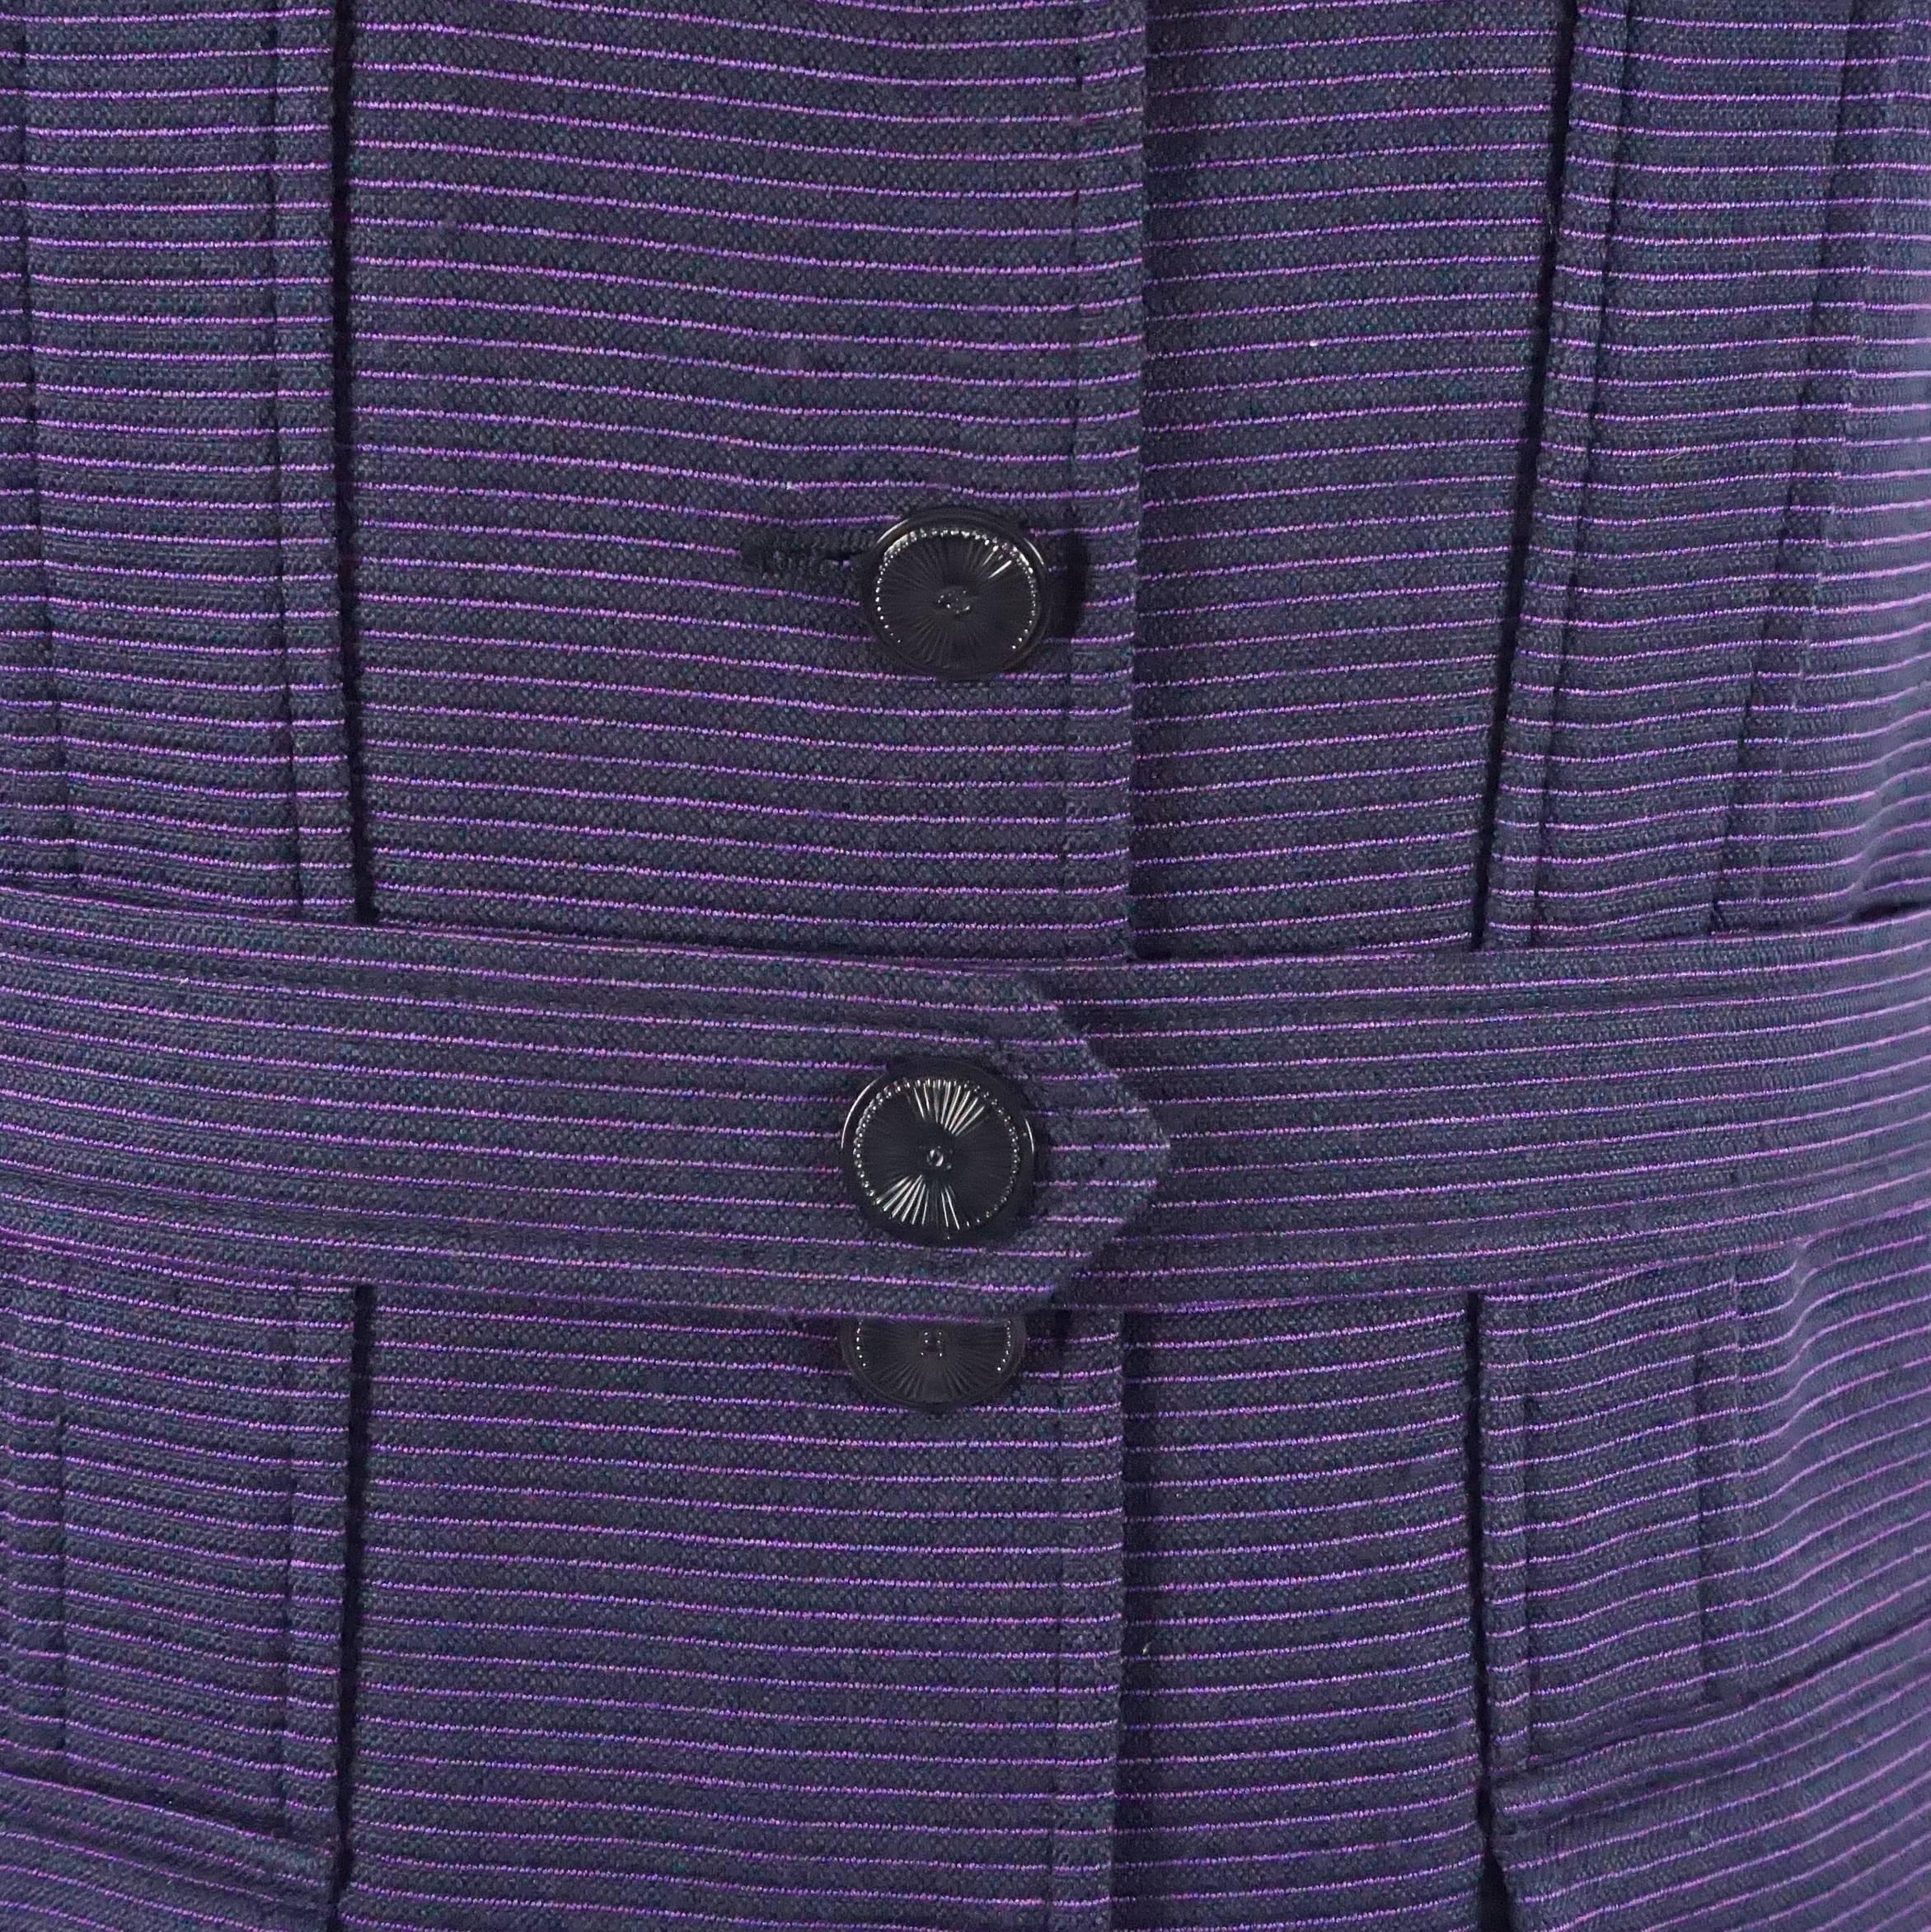 Chanel Spring 2001 Purple Two Toned Wool/Silk Blend Ribbed Skirt - Taille 40 en vente 1